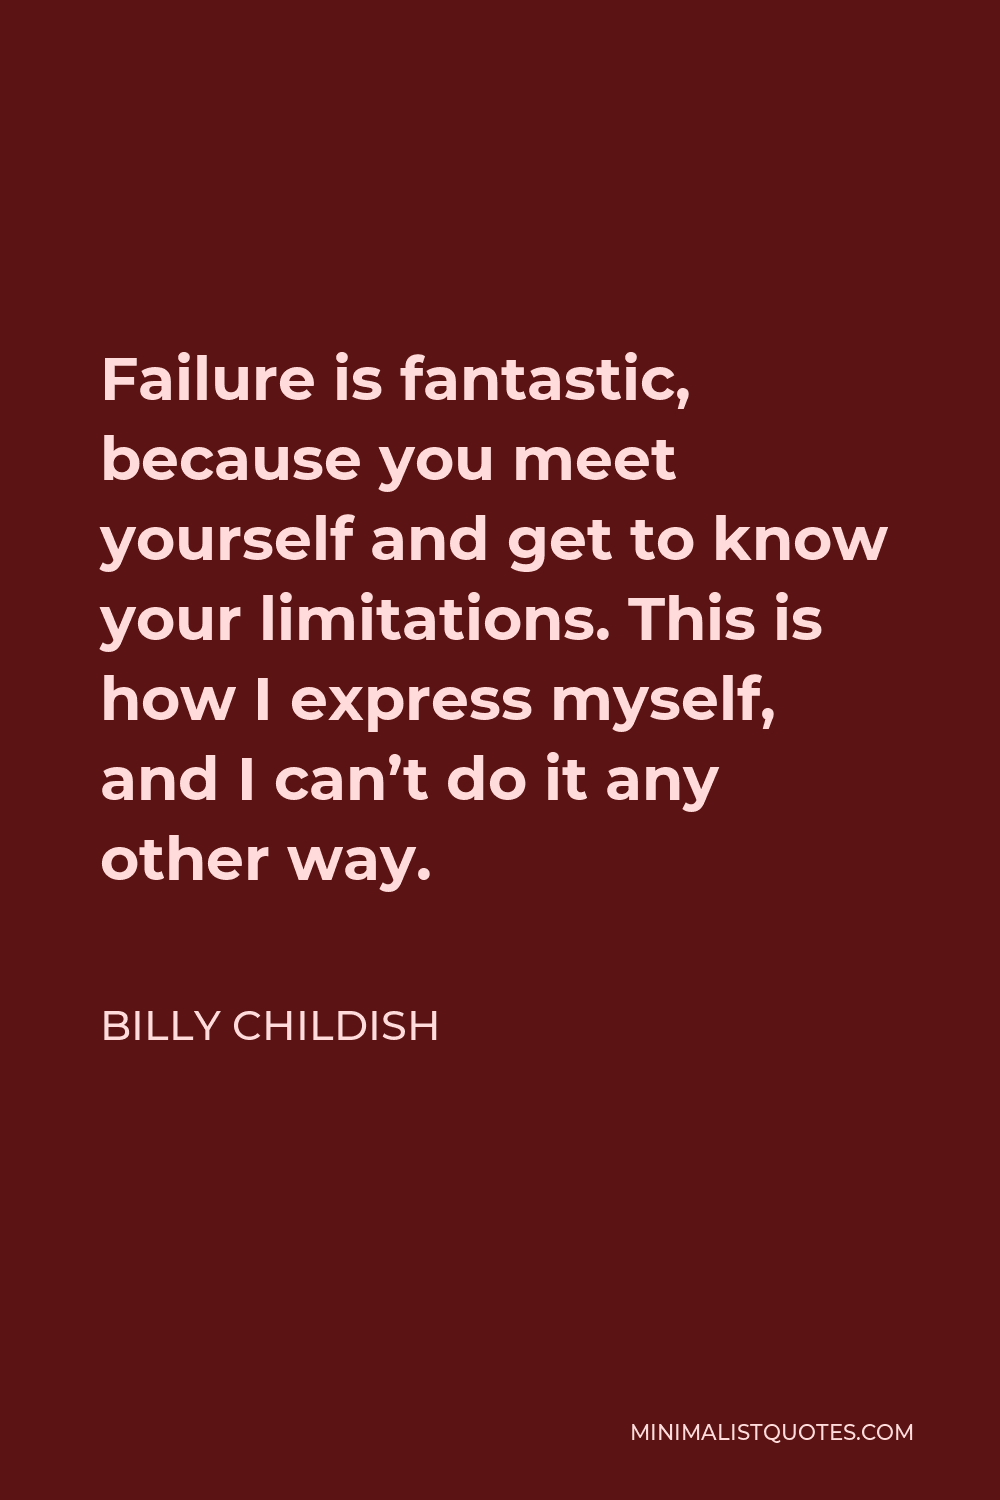 Billy Childish Quote - Failure is fantastic, because you meet yourself and get to know your limitations. This is how I express myself, and I can’t do it any other way.